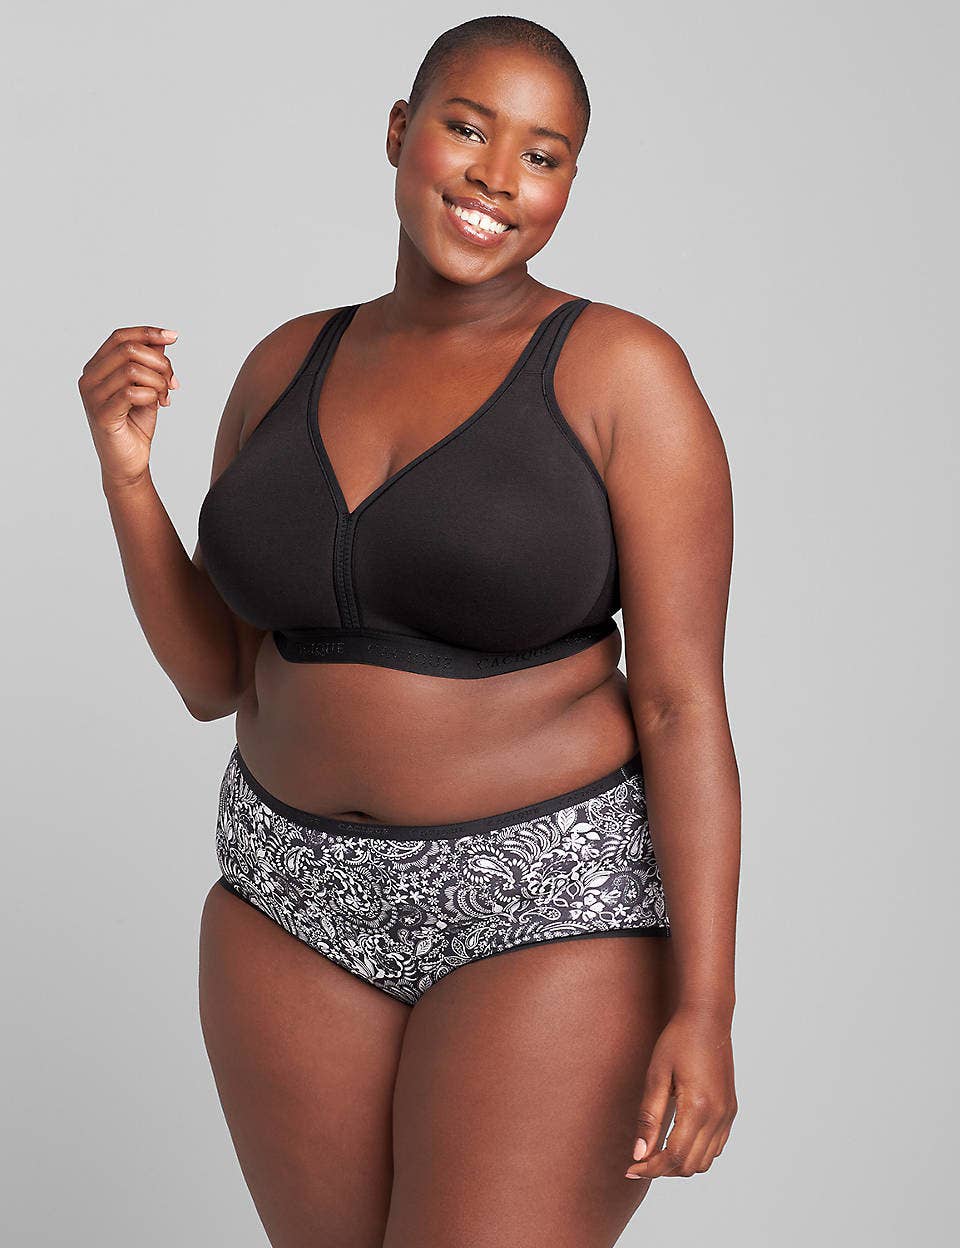 The Most Comfortable Plus-Size Underwear I Own Is $3 a Pair